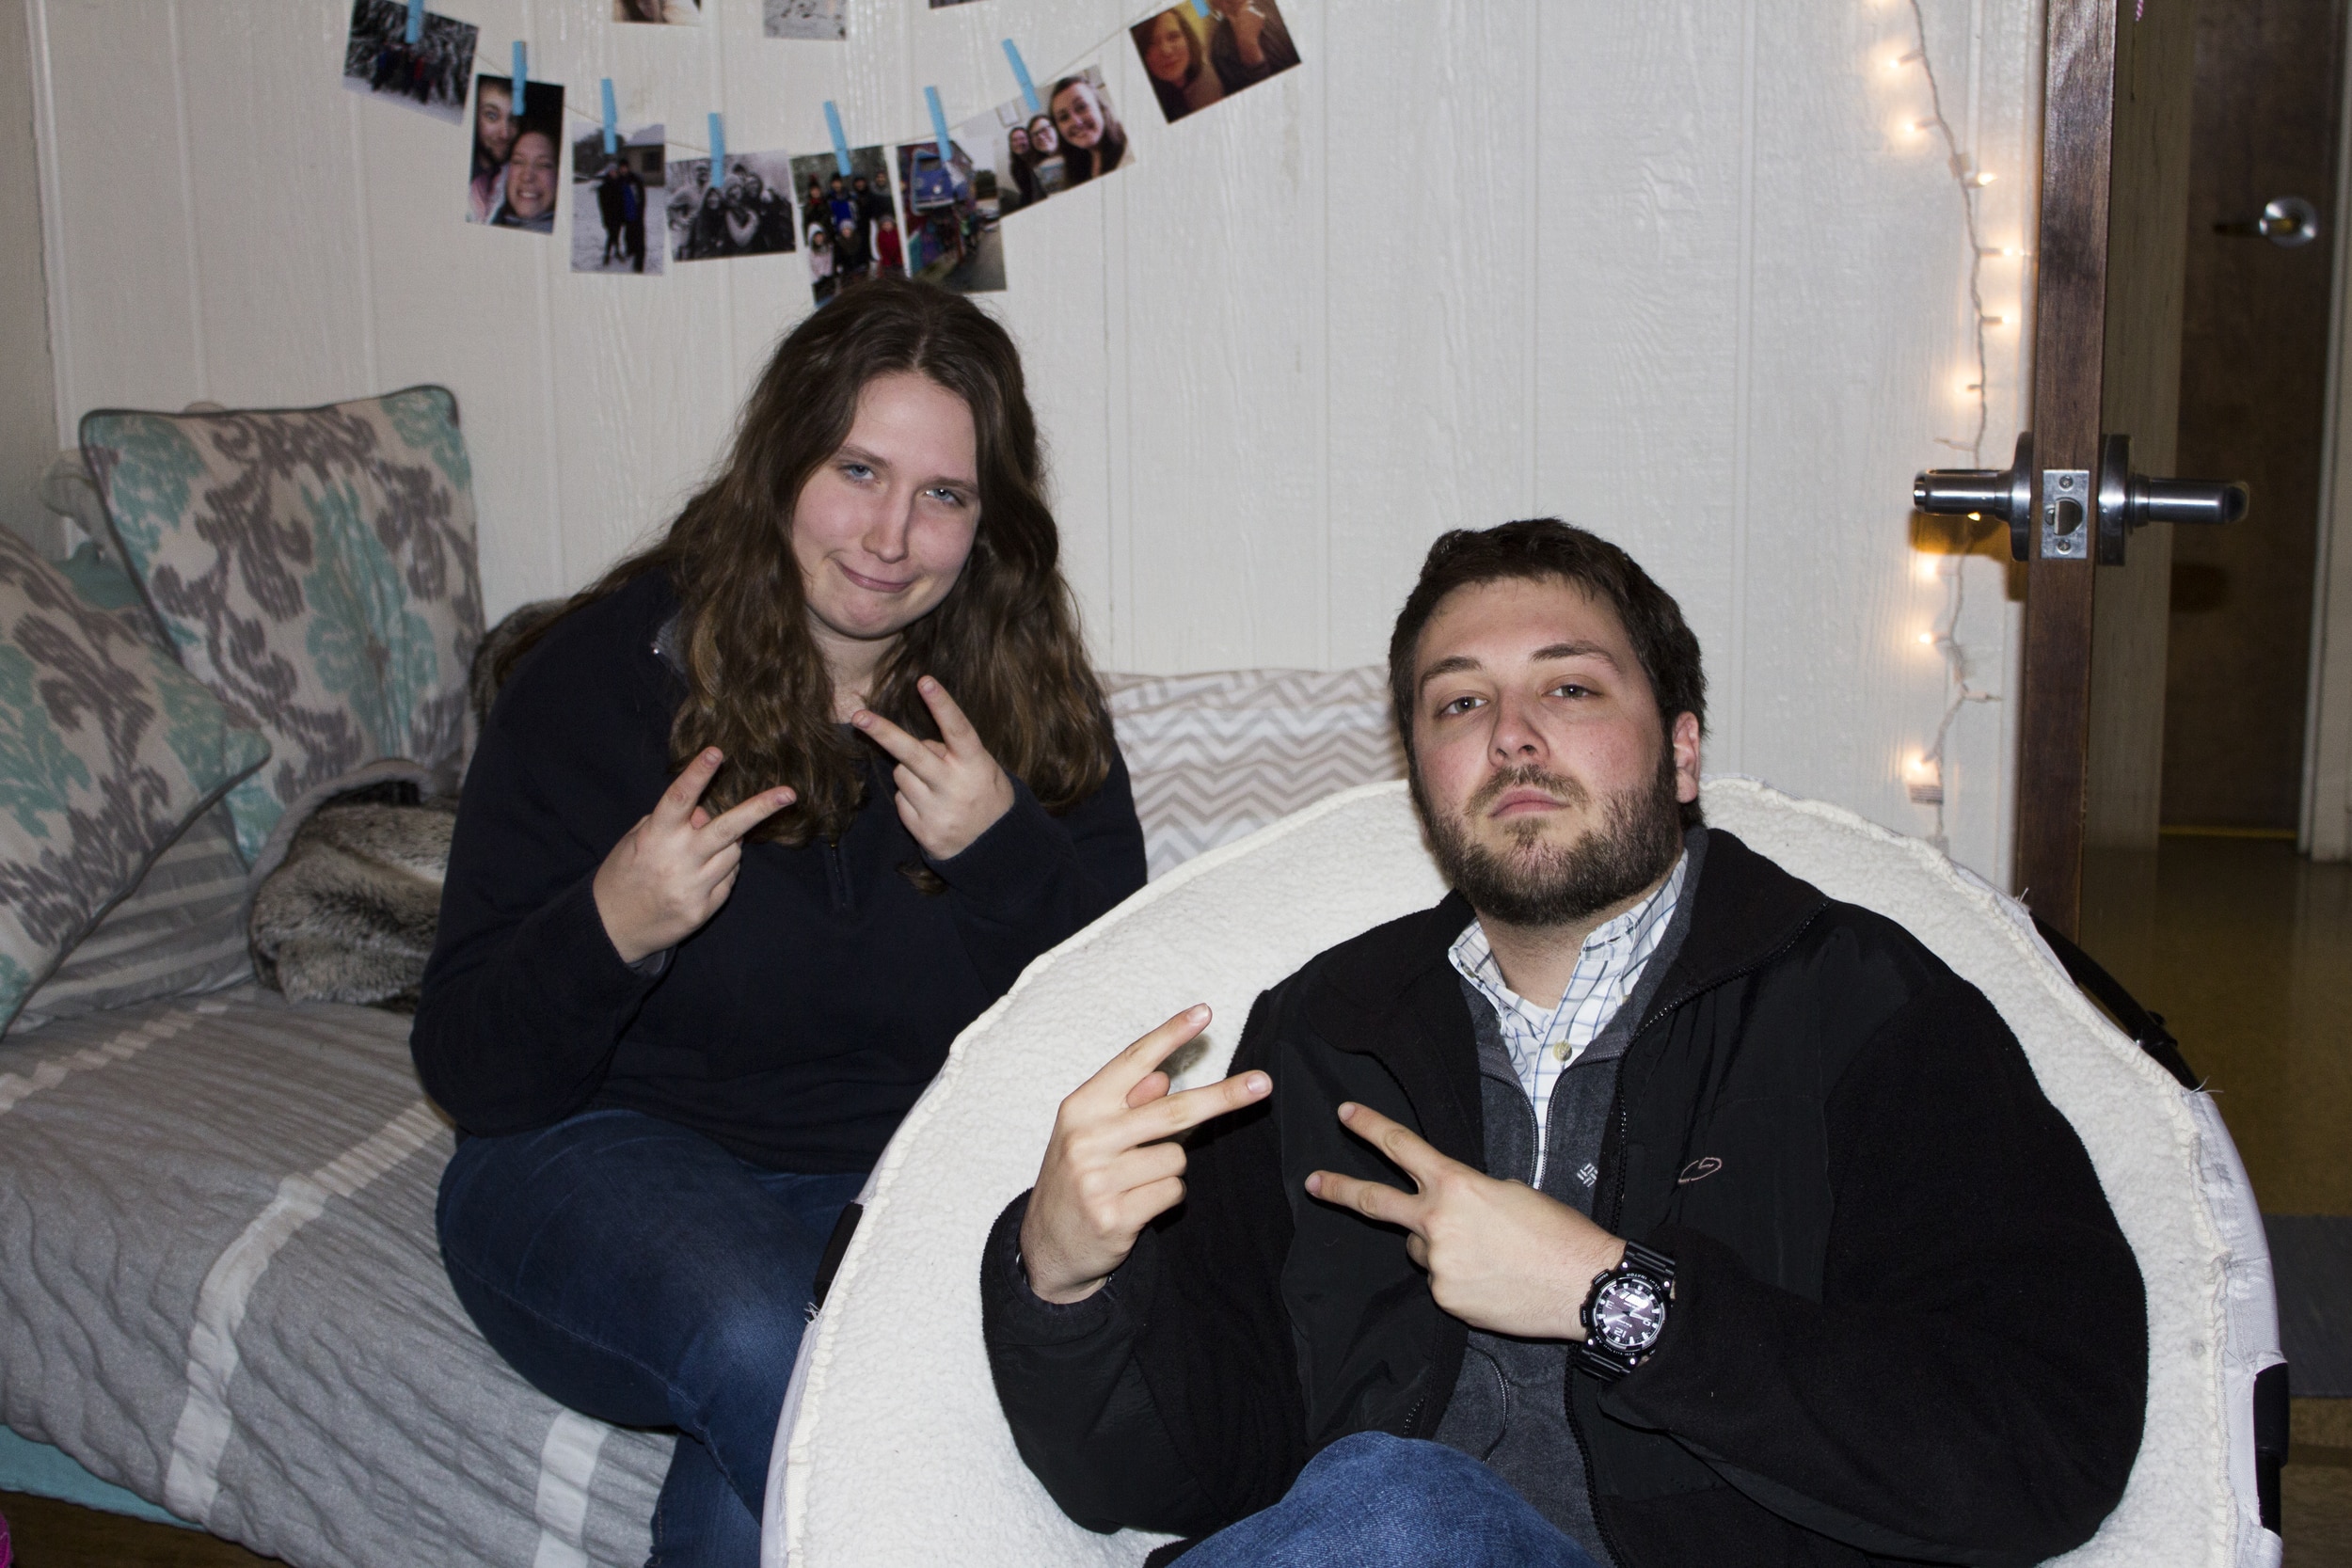  During open dorms,&nbsp;Stuart Floyd and Rebecca Riley decide to stay cool and keep the laughter high.&nbsp; 